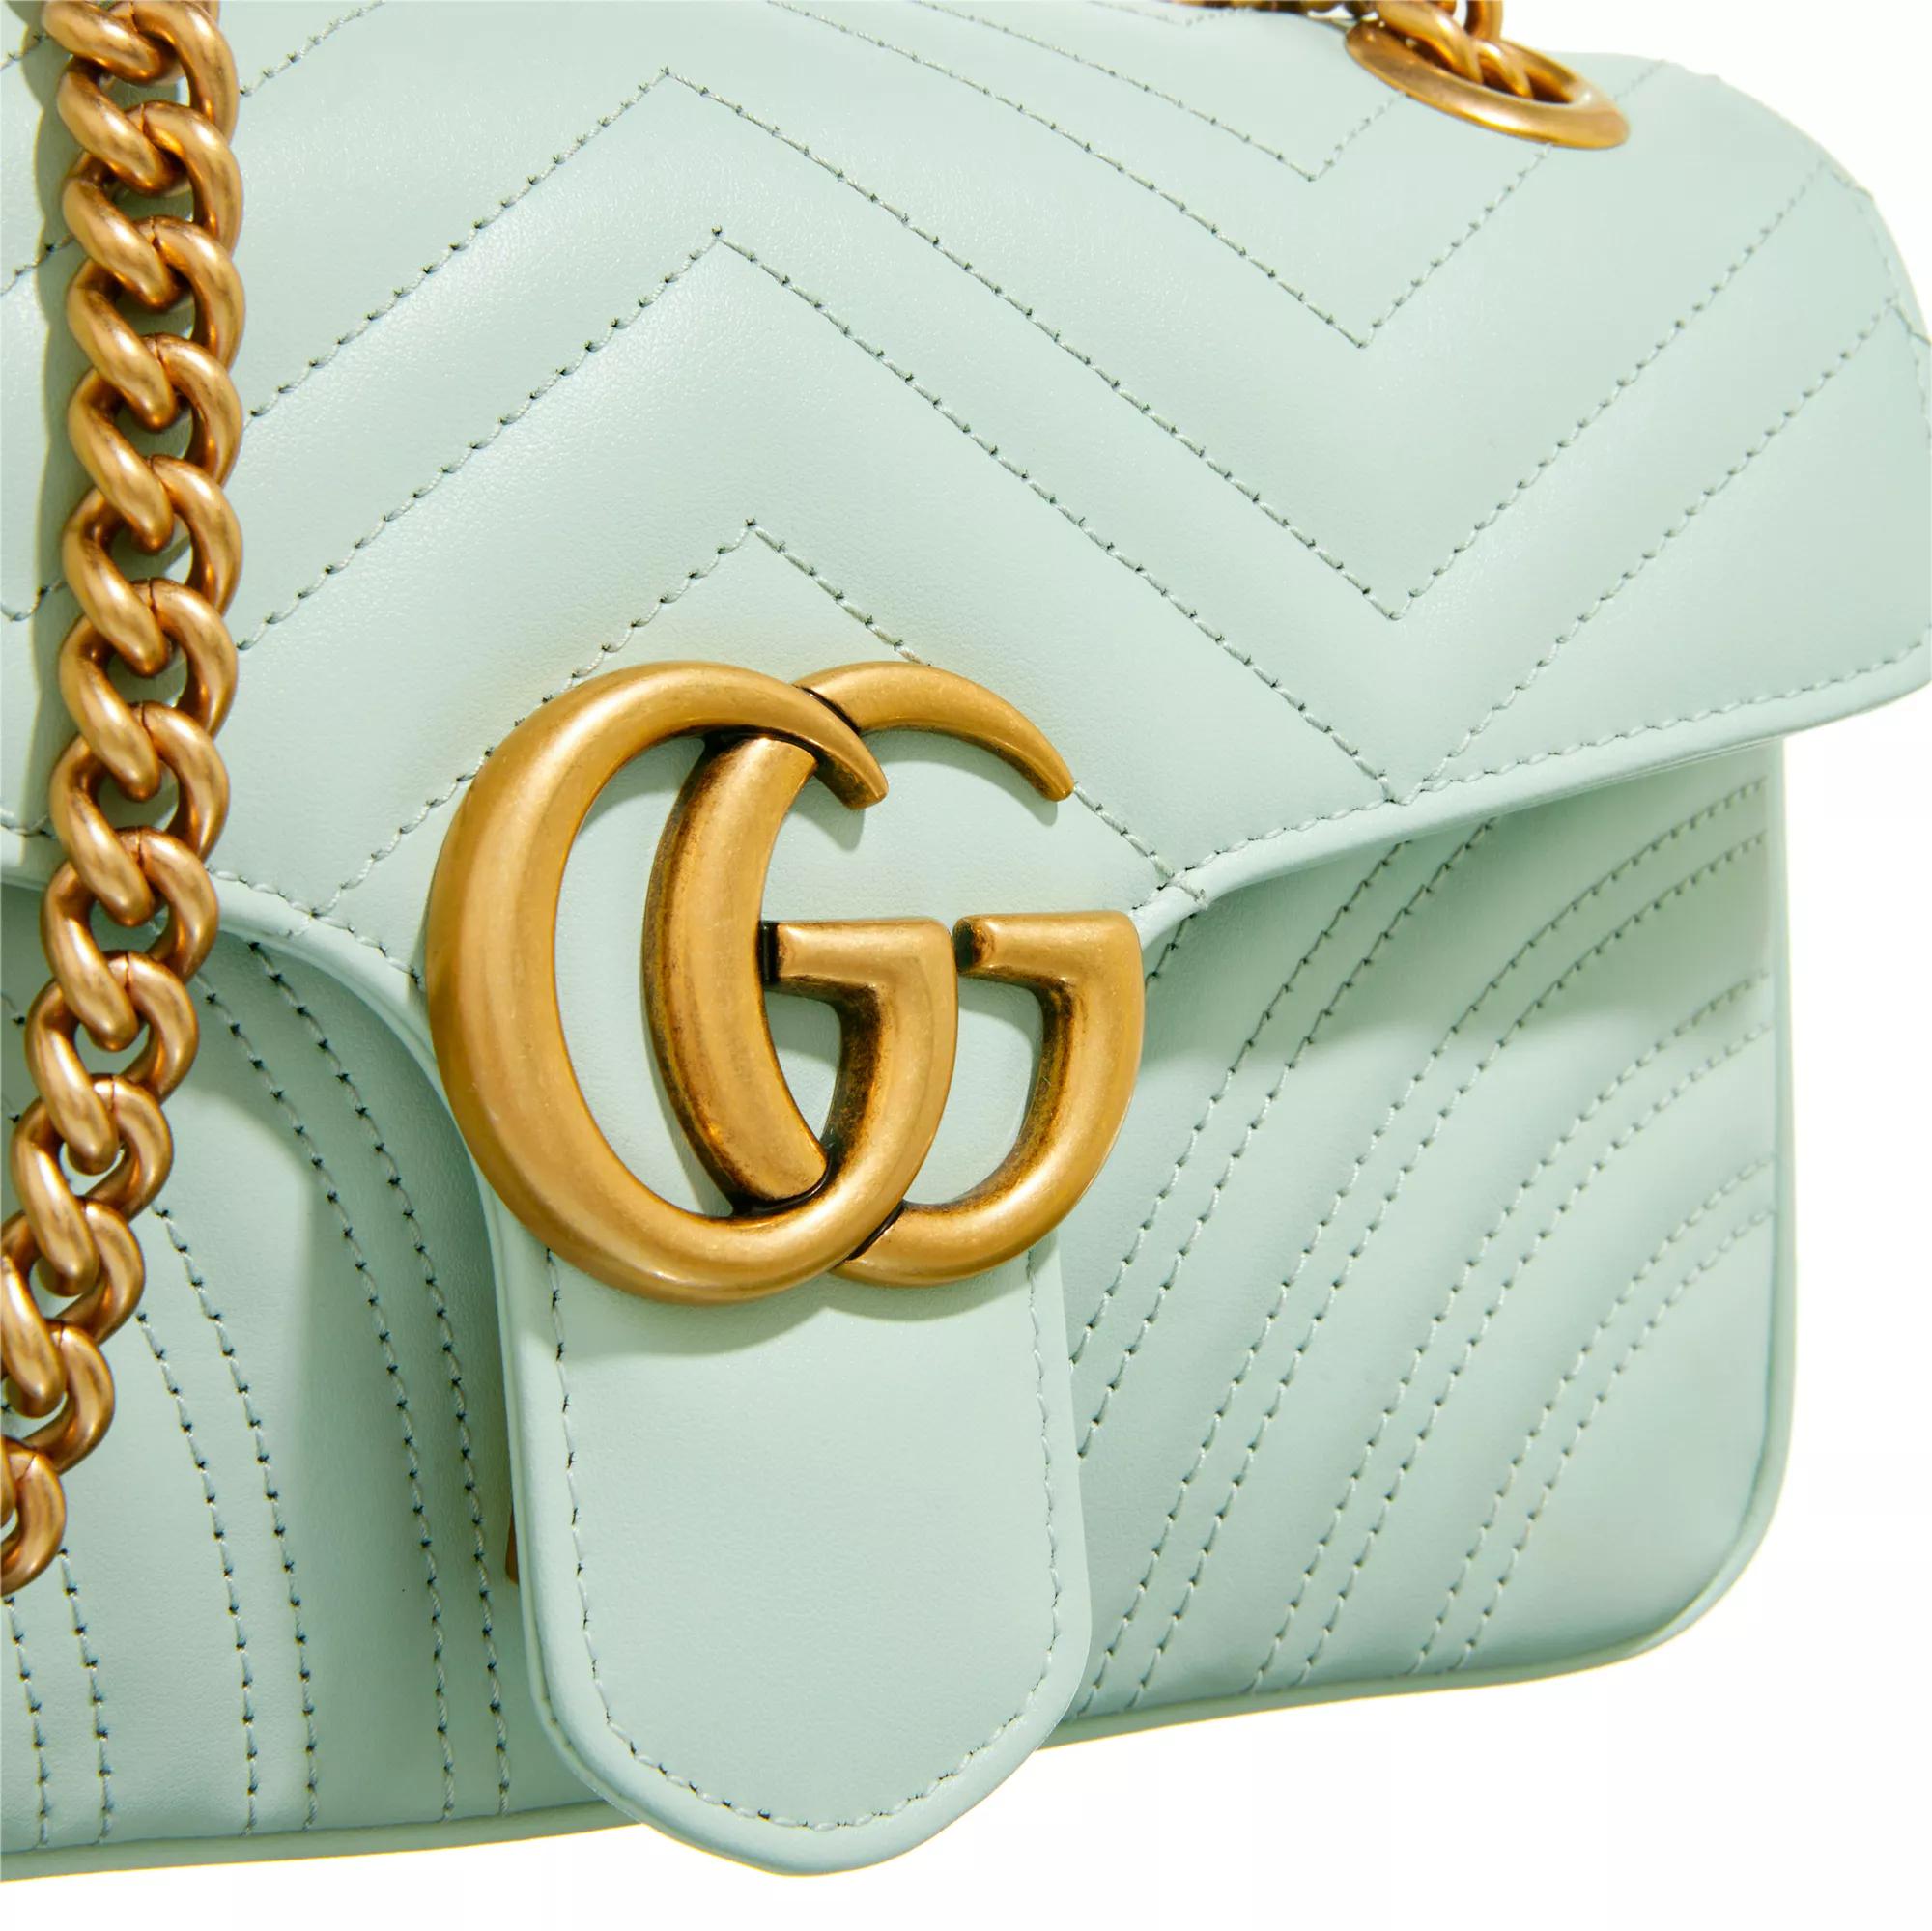 Gucci Crossbody bags Small GG Marmont Shoulder Bag Matelassé Leather in groen